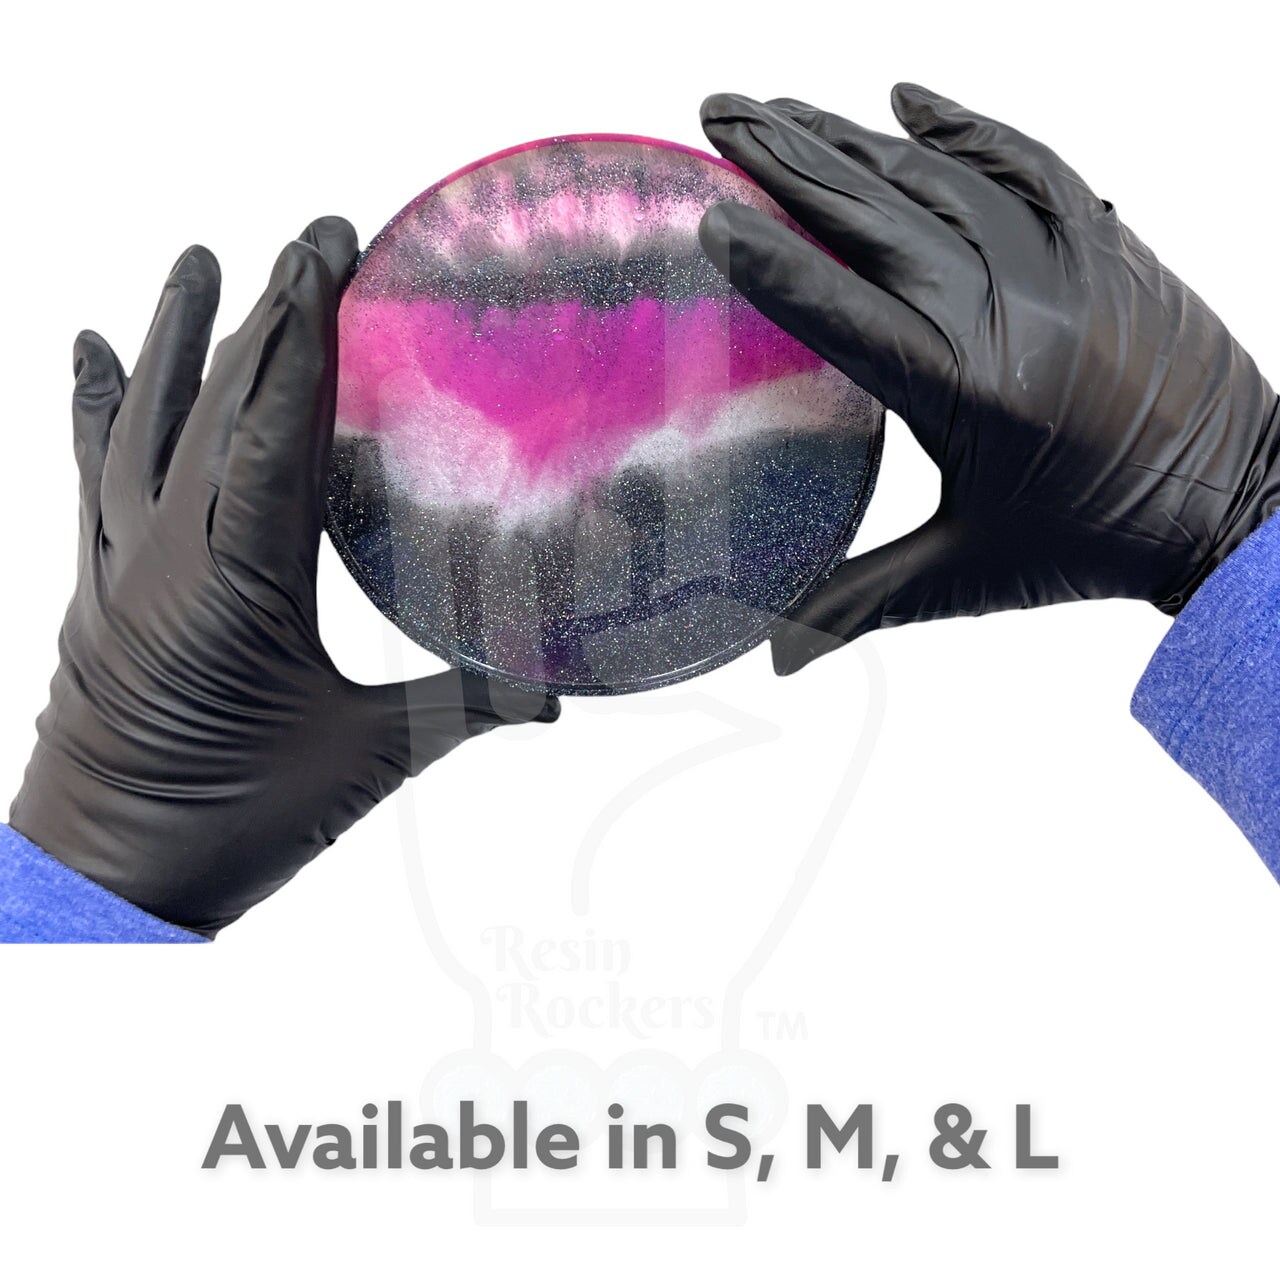 Ms. Mandy&#x27;s Famous Heavy Duty Black Reusable Nitrile Gloves for Epoxy or UV Resin